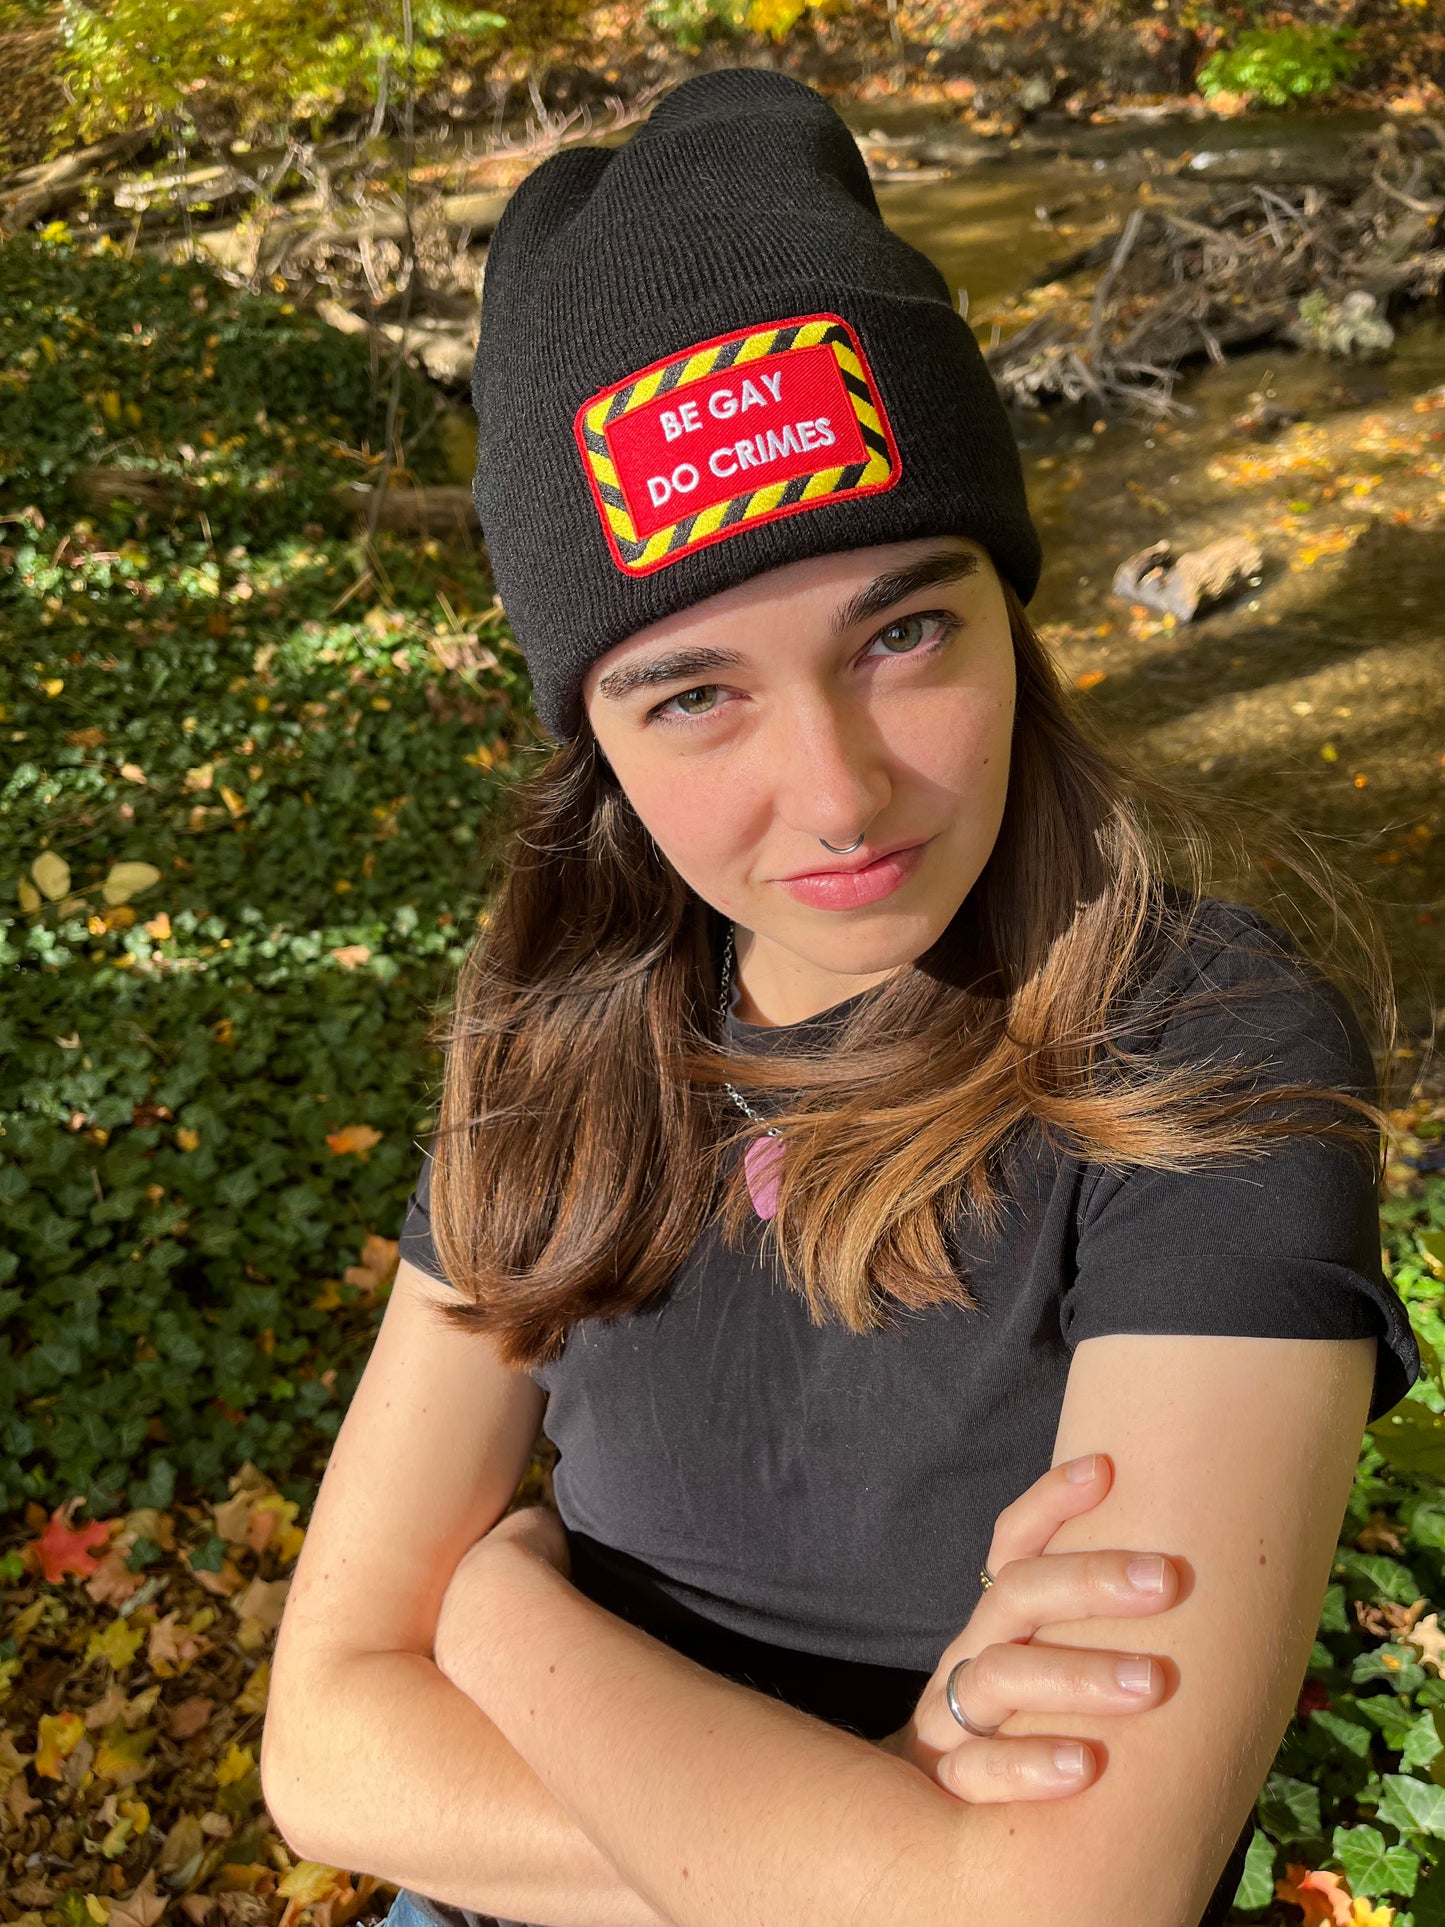 person with arms crossed wearing black "be gay do crimes" beanie against a forest background